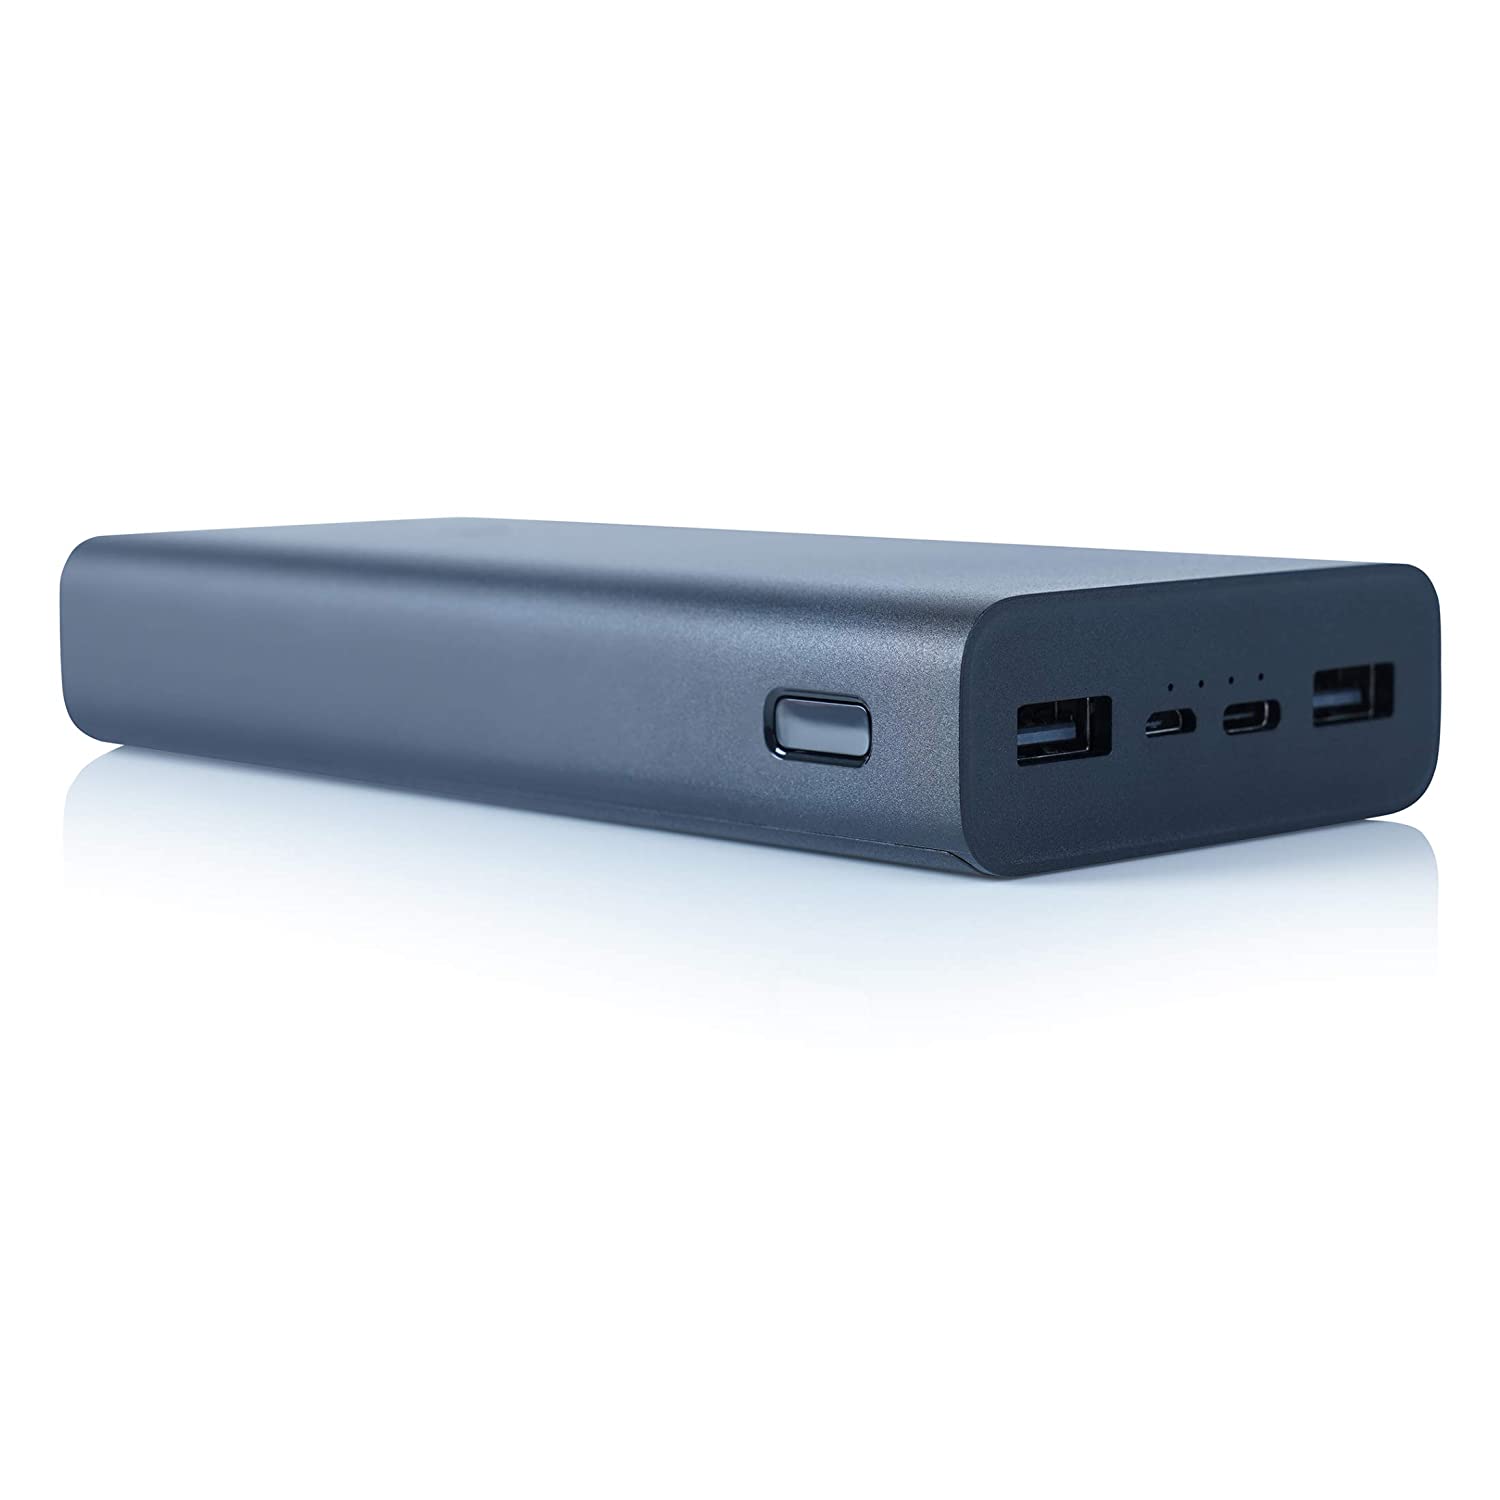 Mi Power Bank 3i 20000mAh Triple Output at Lowest Online Price –